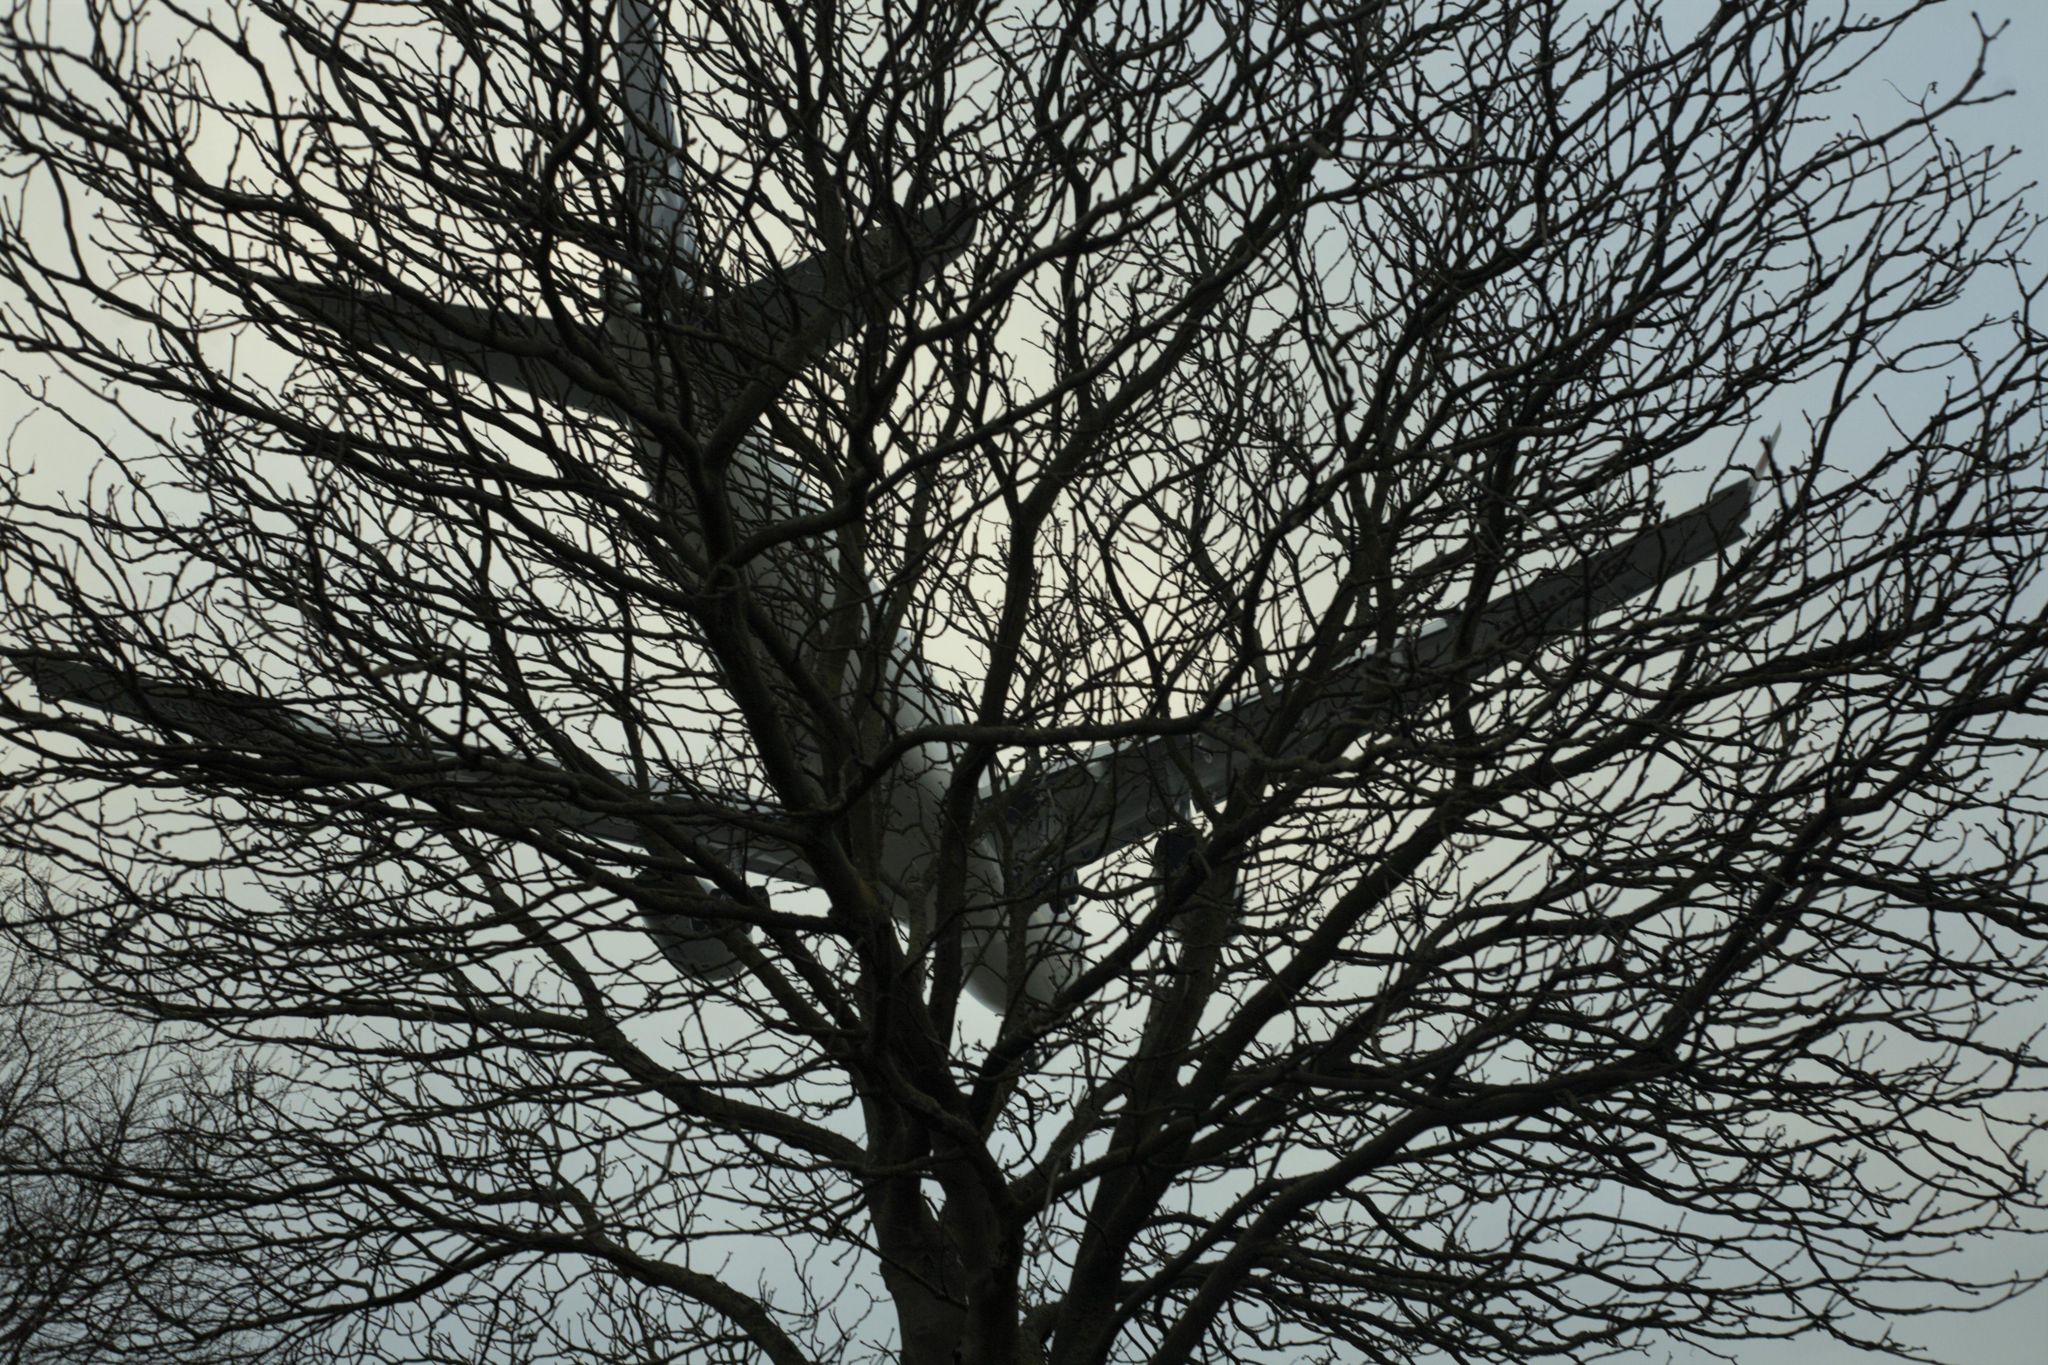 Plane above tree with no leaves in winter 